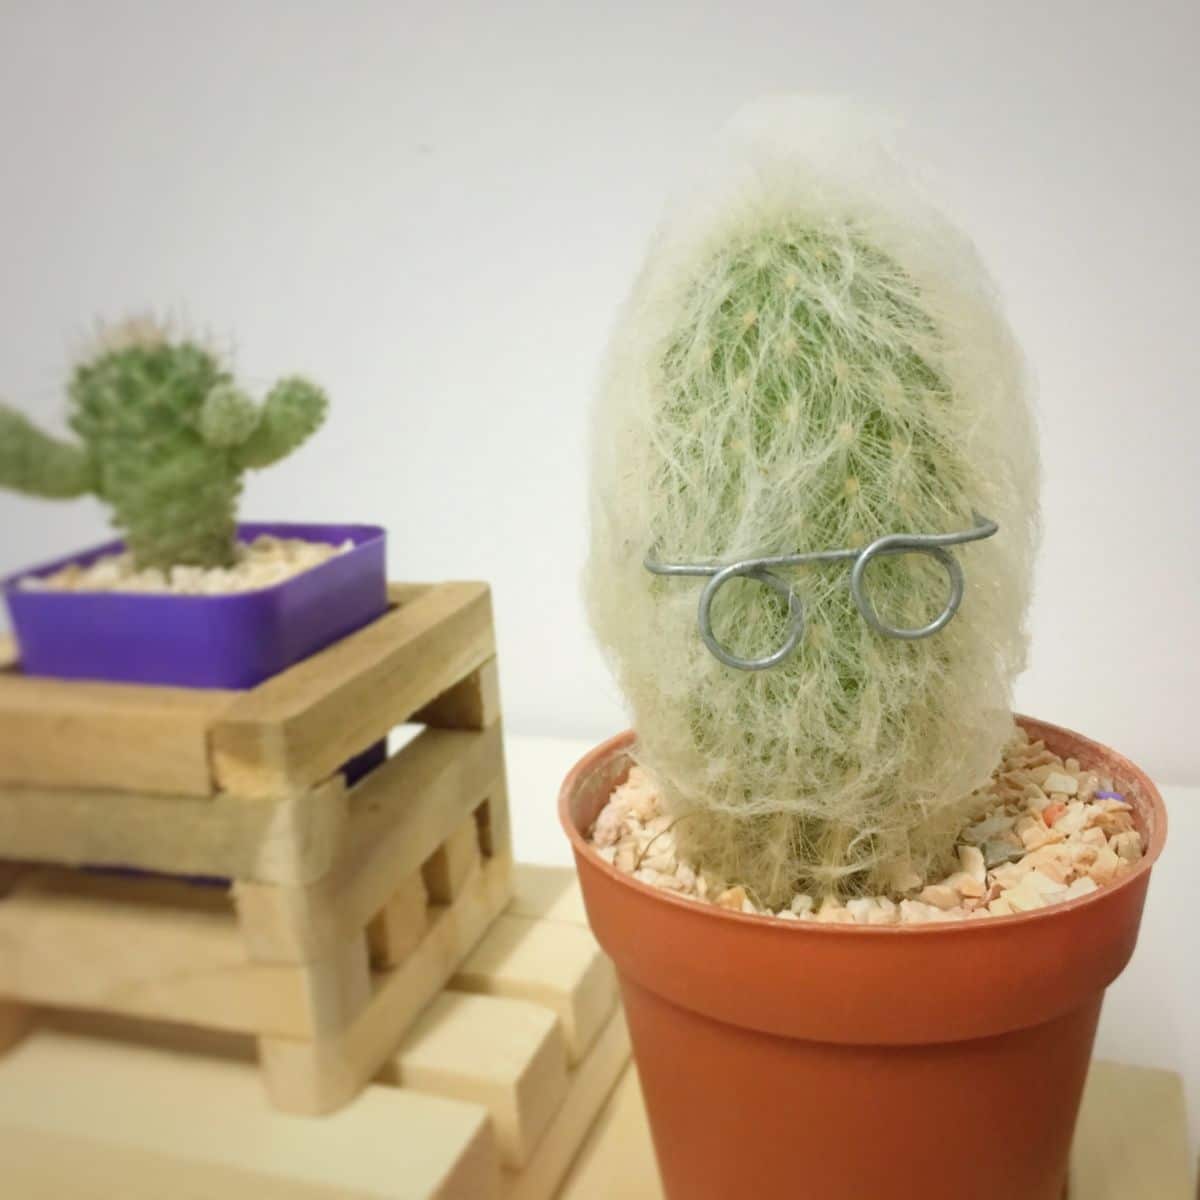 An old man cactus sports a pair of "glasses"